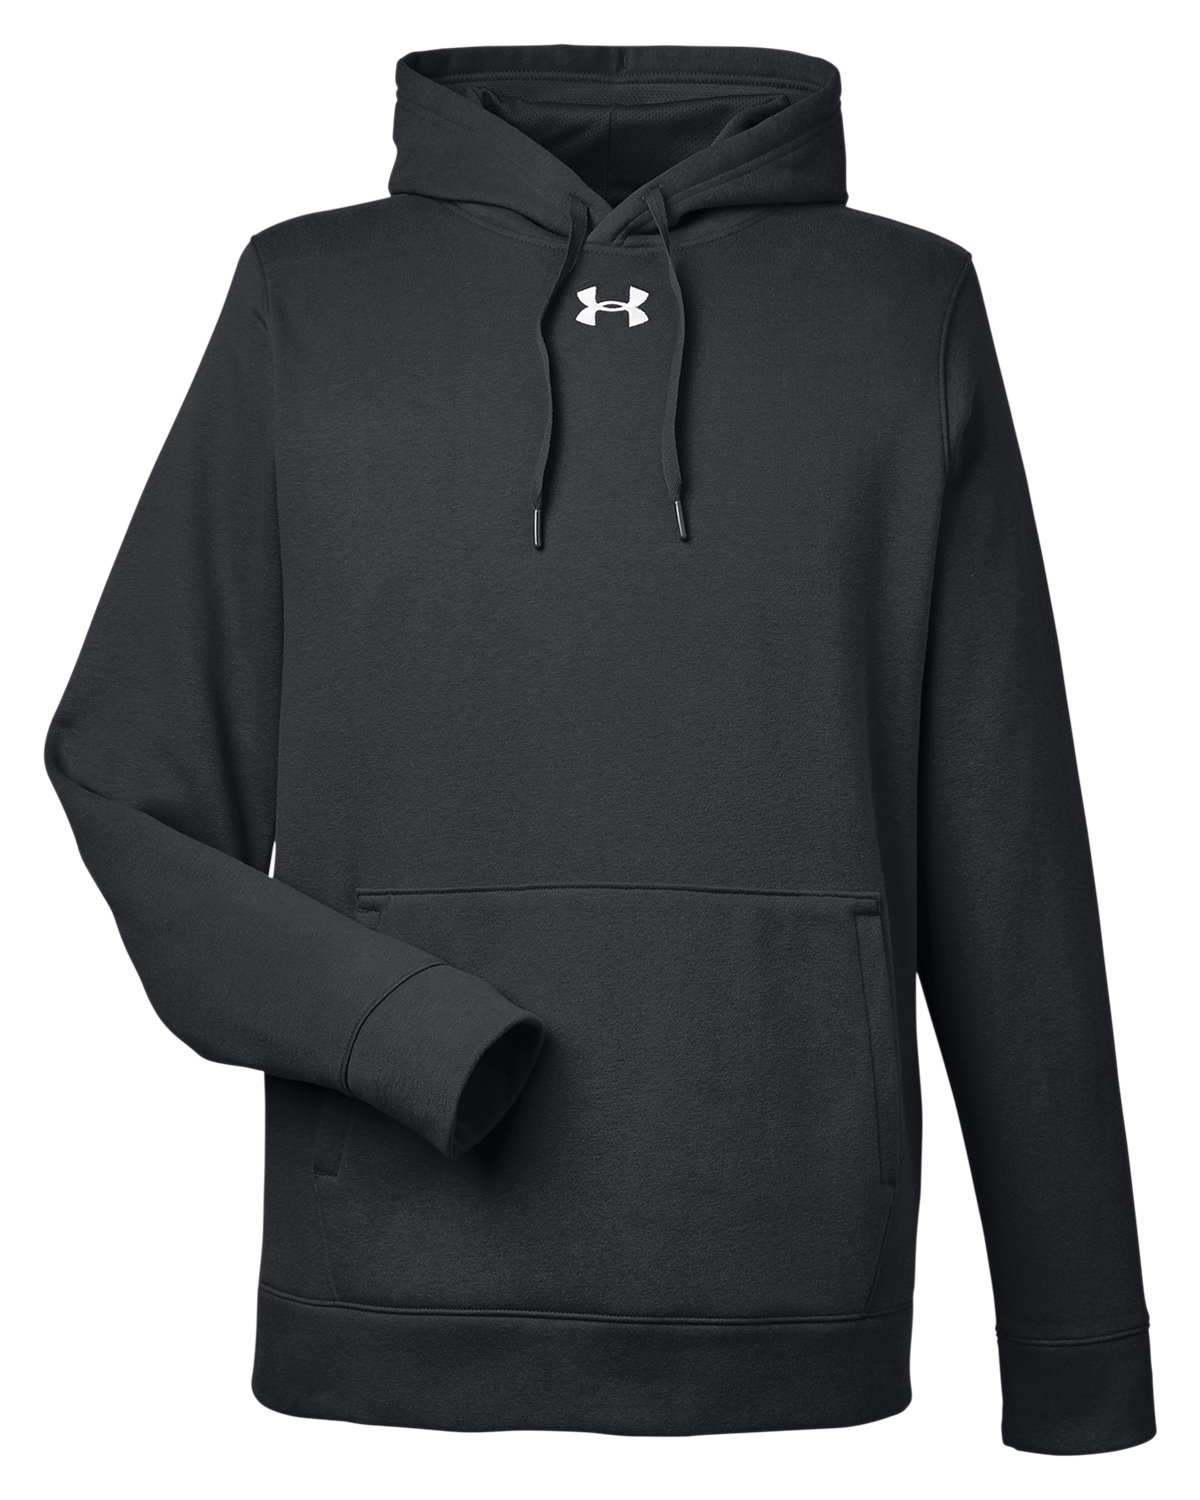 Embroider Under Armour 1300123 - Men's Hustle Pullover Hooded ...